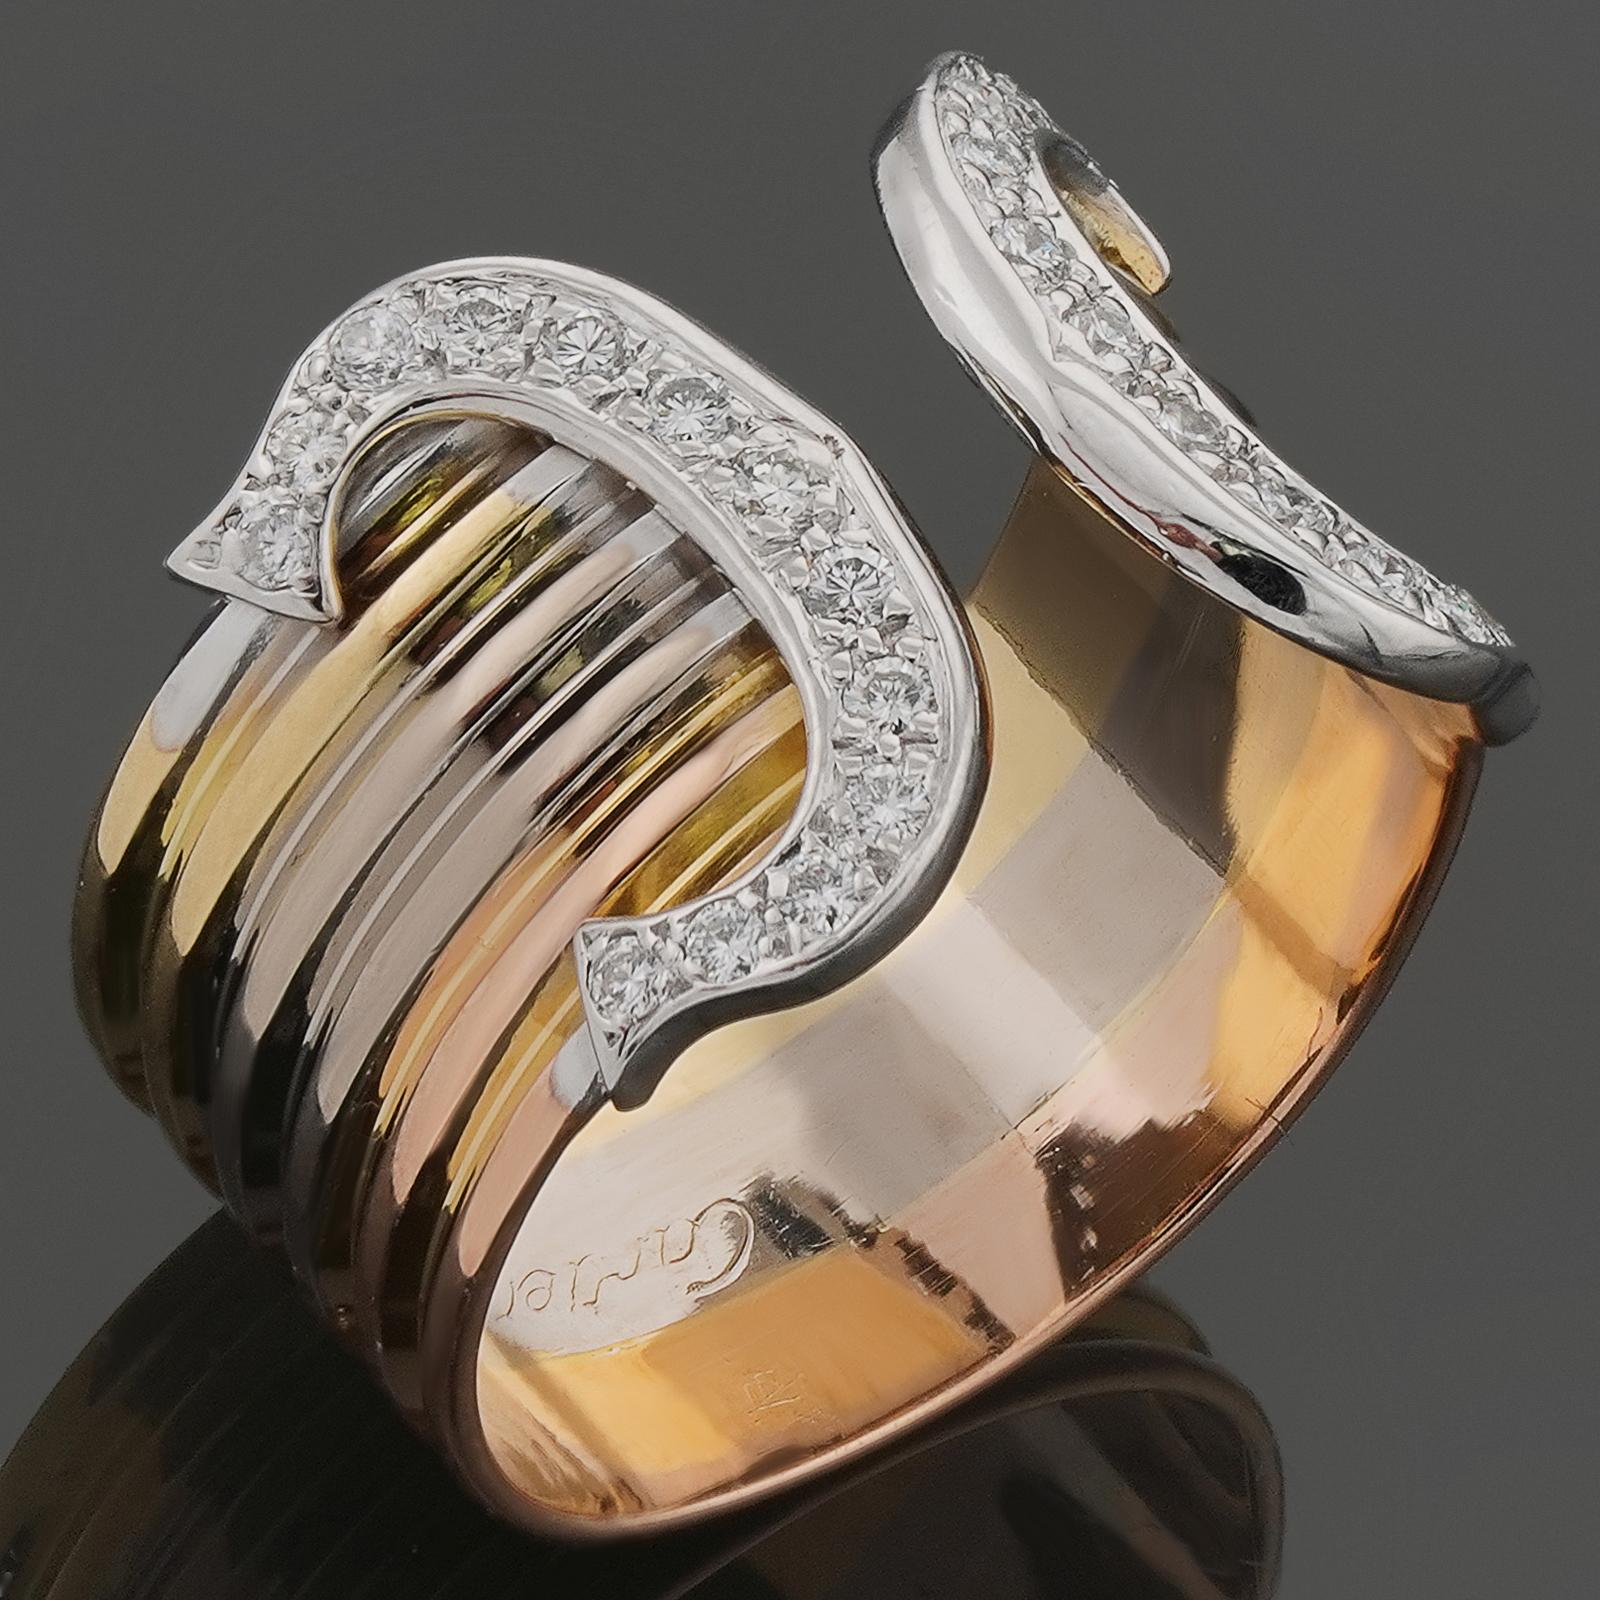 This elegant Cartier open ring features a 3-band design crafted in 18k yellow, white, and rose gold and completed with the iconic Double C ends set with brilliant-cut round E-F-G	VVS1-VVS2 diamonds. Made in France circa 1990s. The ring size slightly